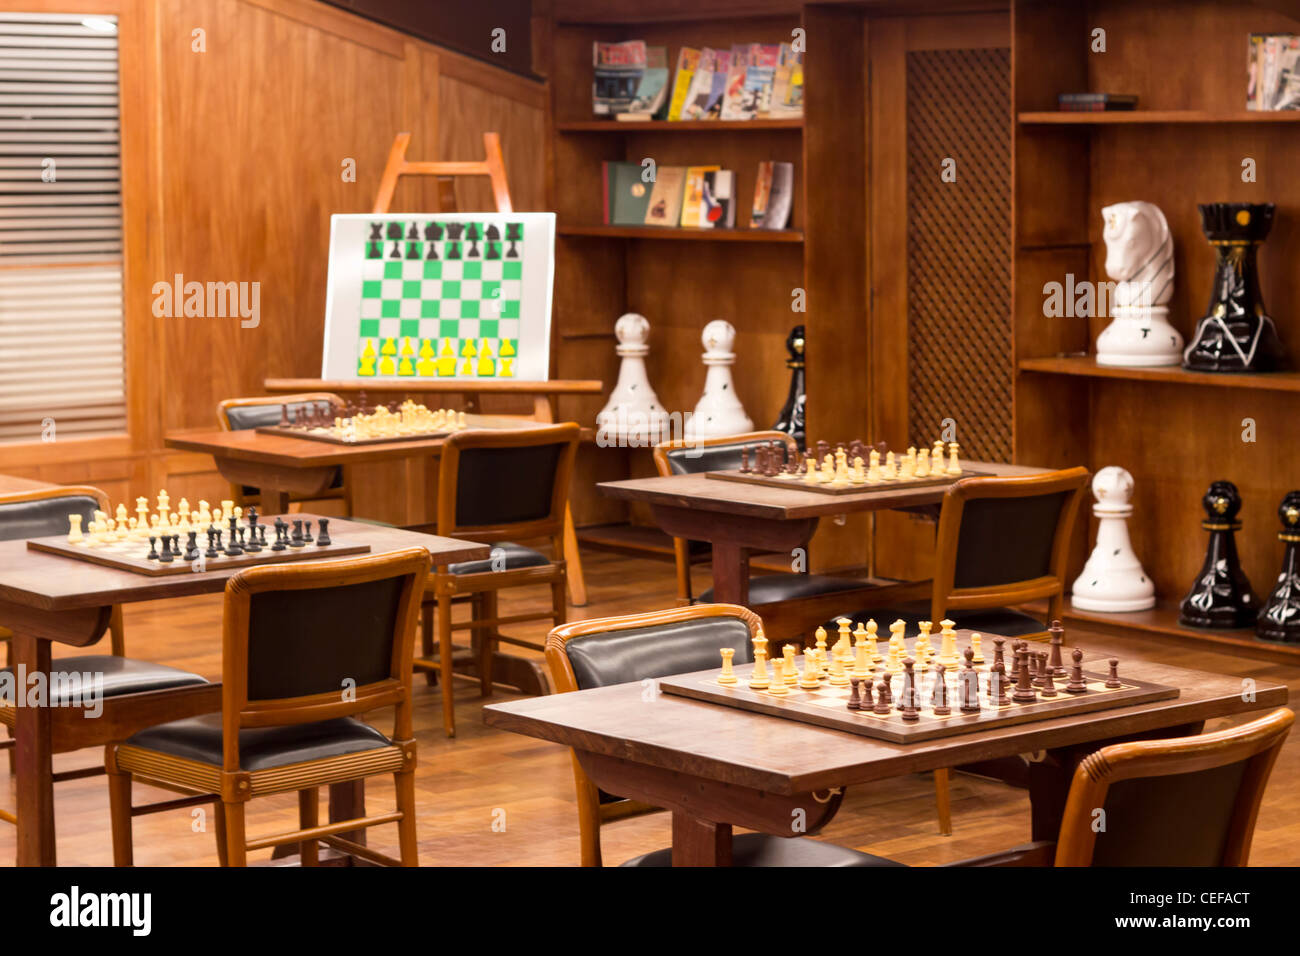 Friendly Games at a Local Chess Club Stock Photo - Alamy